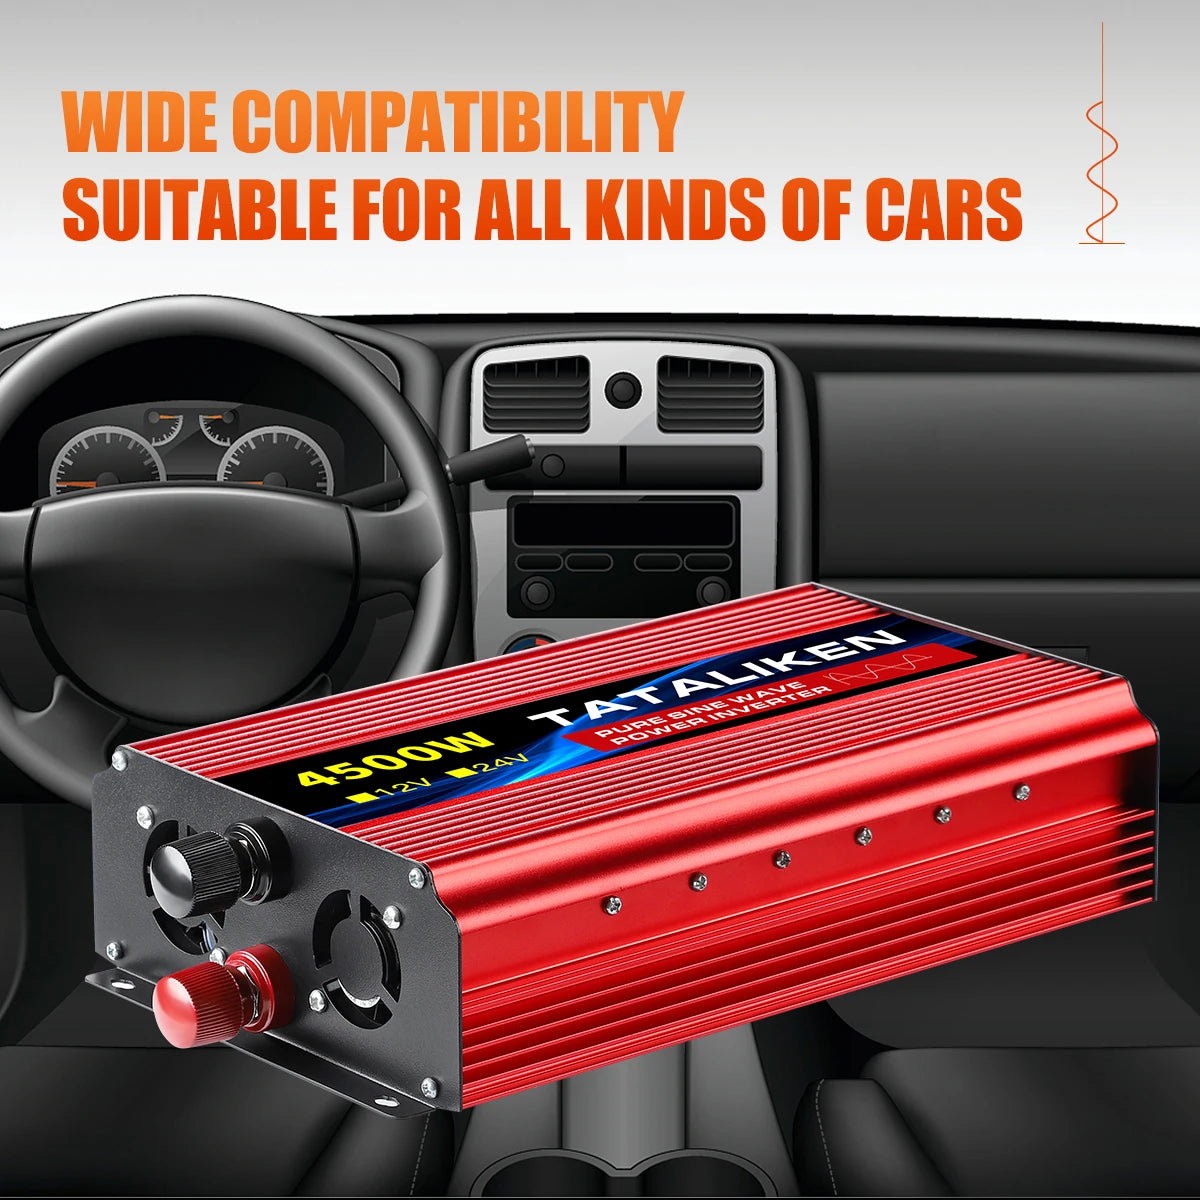 pure sine wave inverter, Tataliken Universal Power Adapter with AC 220V output, 1500W power, and 50Hz frequency.